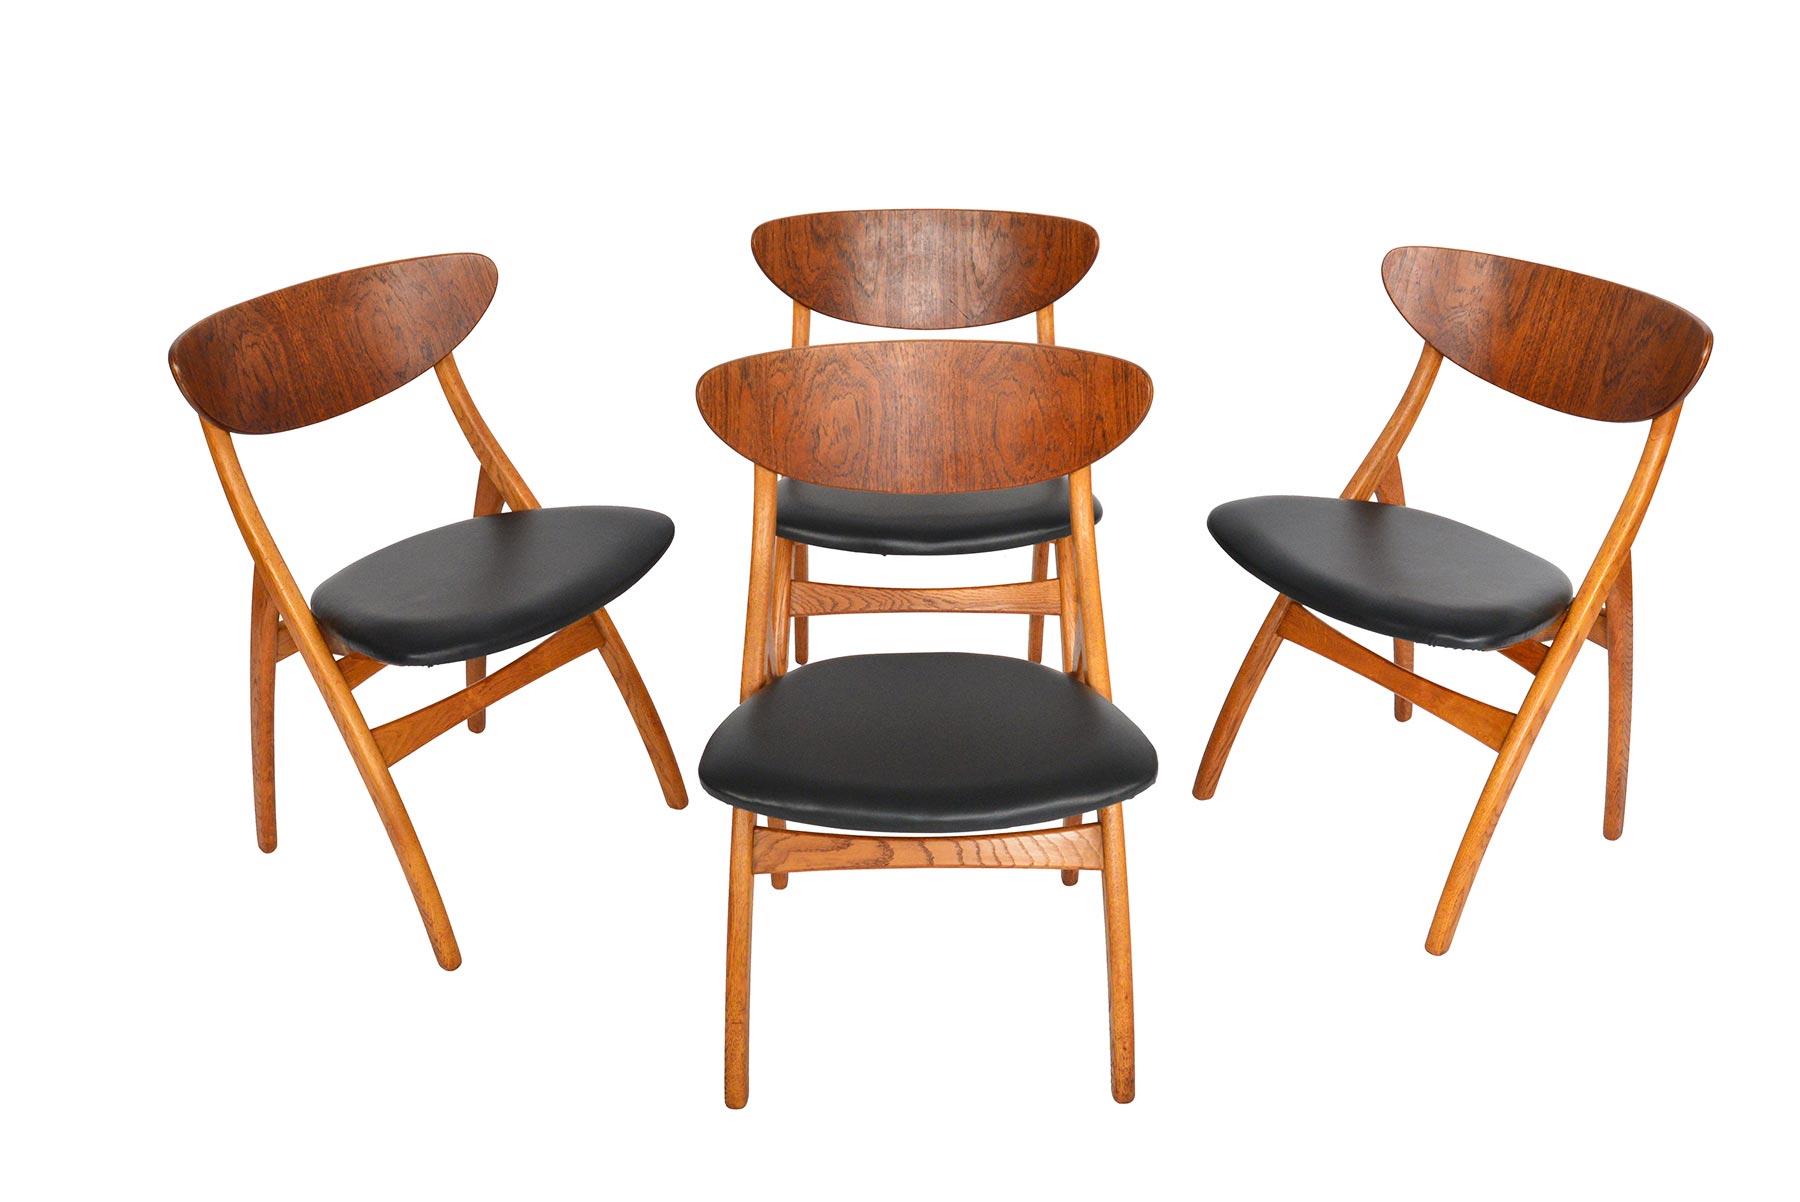 This set of four Danish modern dining chairs is a perfect example of organic design achieved through ingenious construction. Bent teak backrests curve to provide support. A solid quarter- sawn oak leg swags forward with rear legs canted back. A